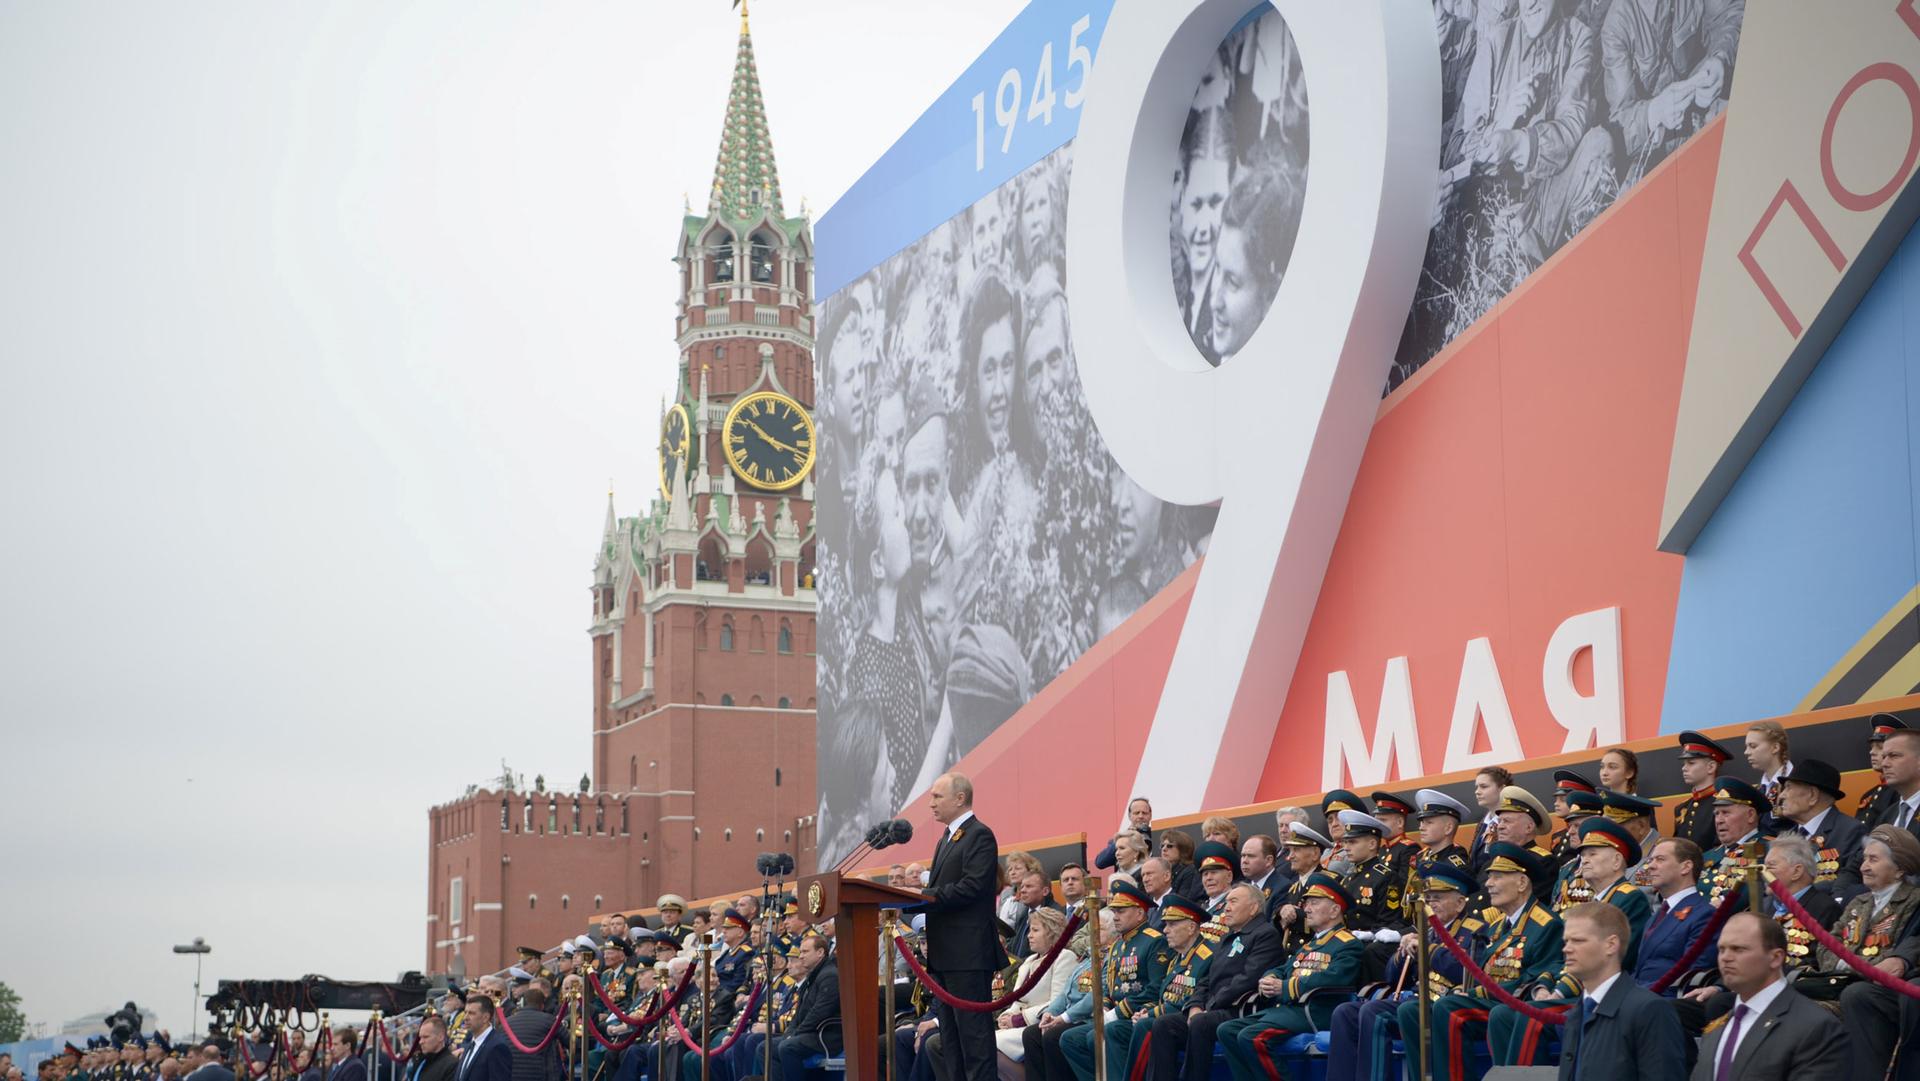 Putin stands at a podium in front of a crowd and signage for May 9